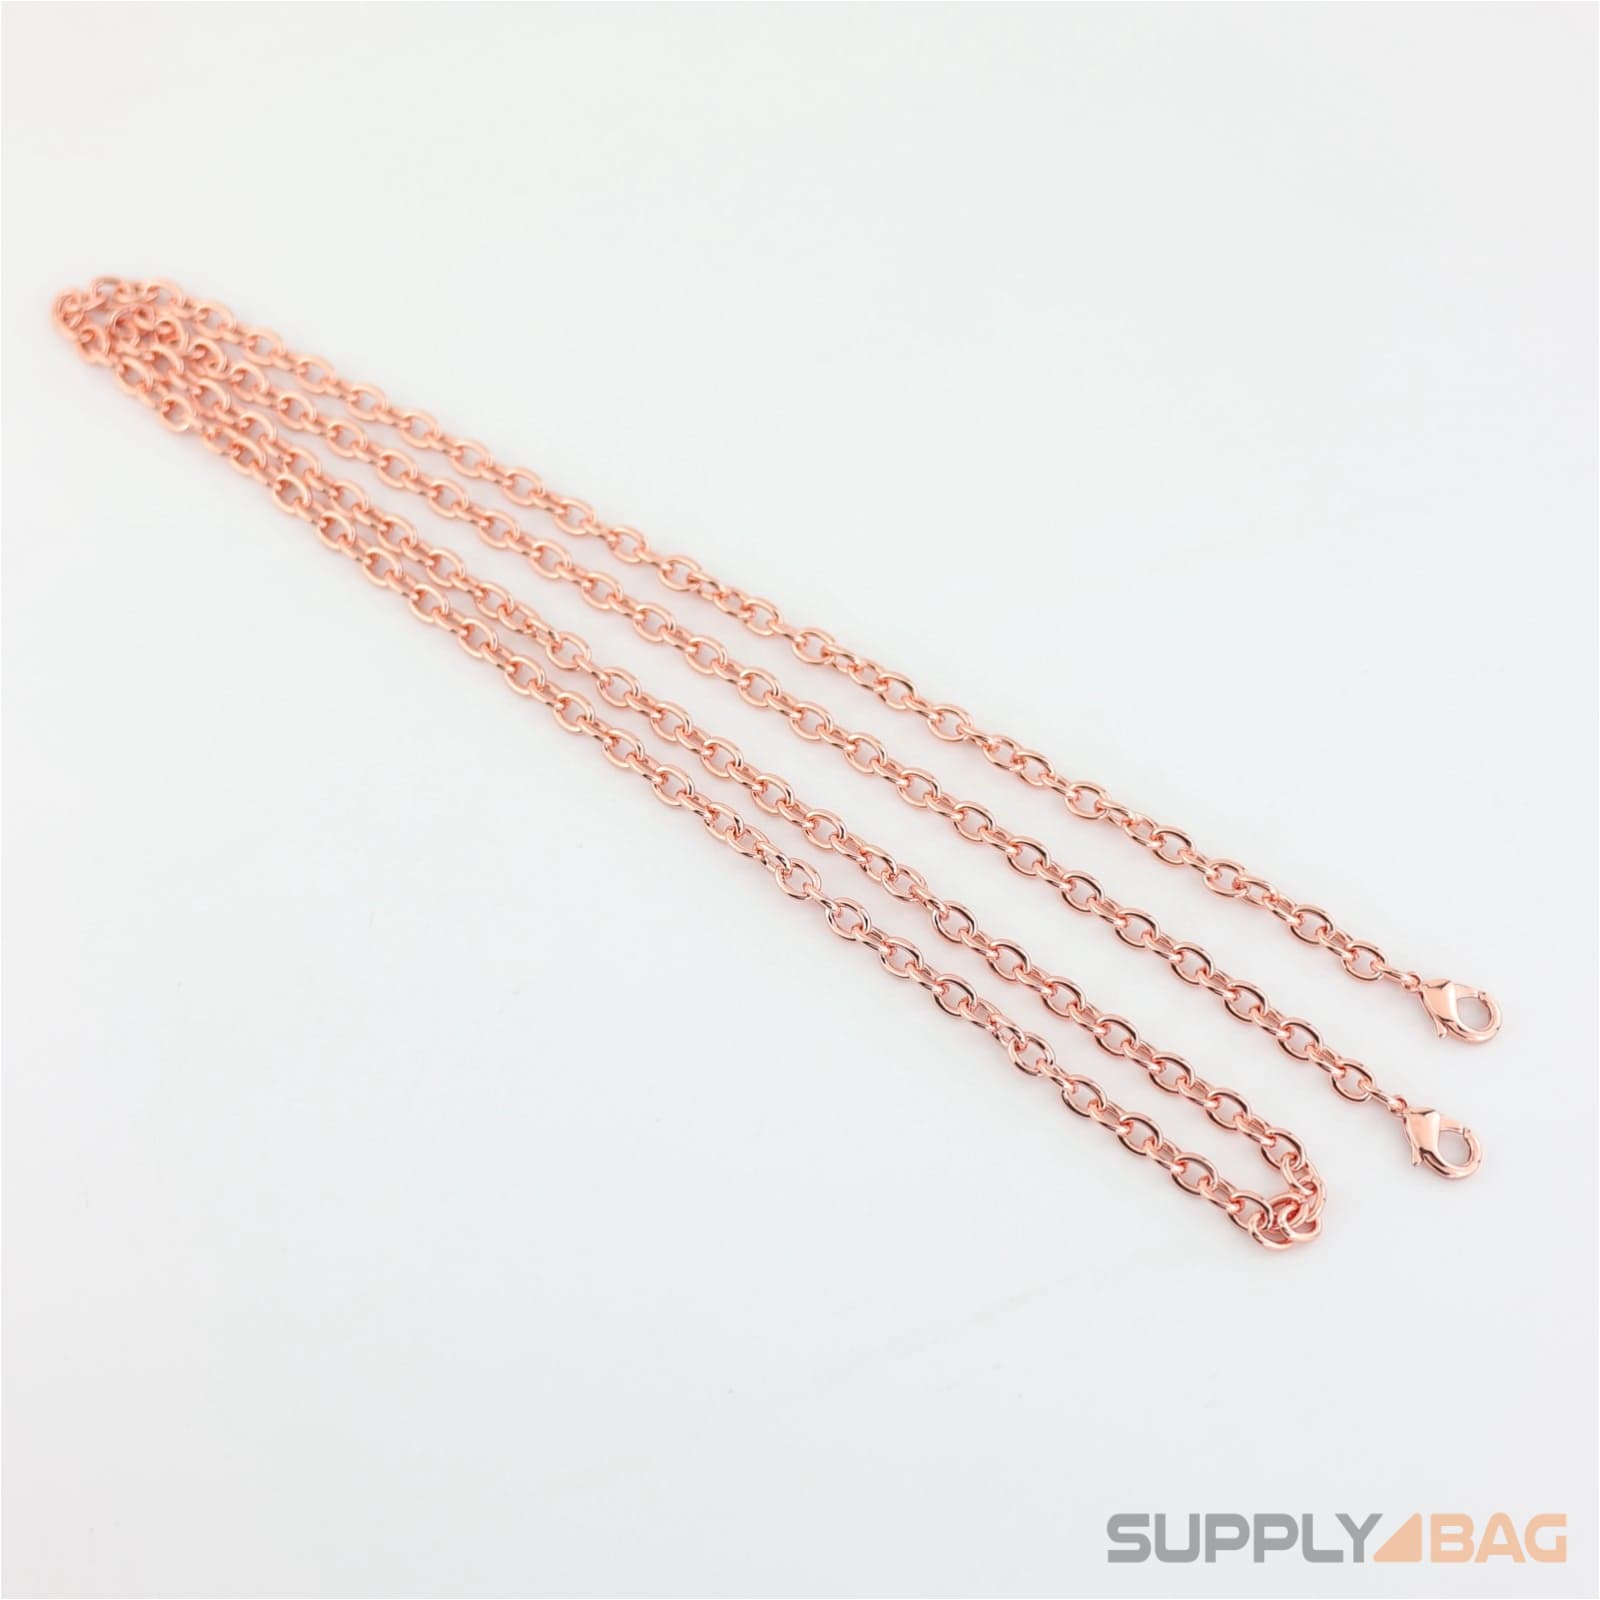 48 inch - rose gold small purse chain